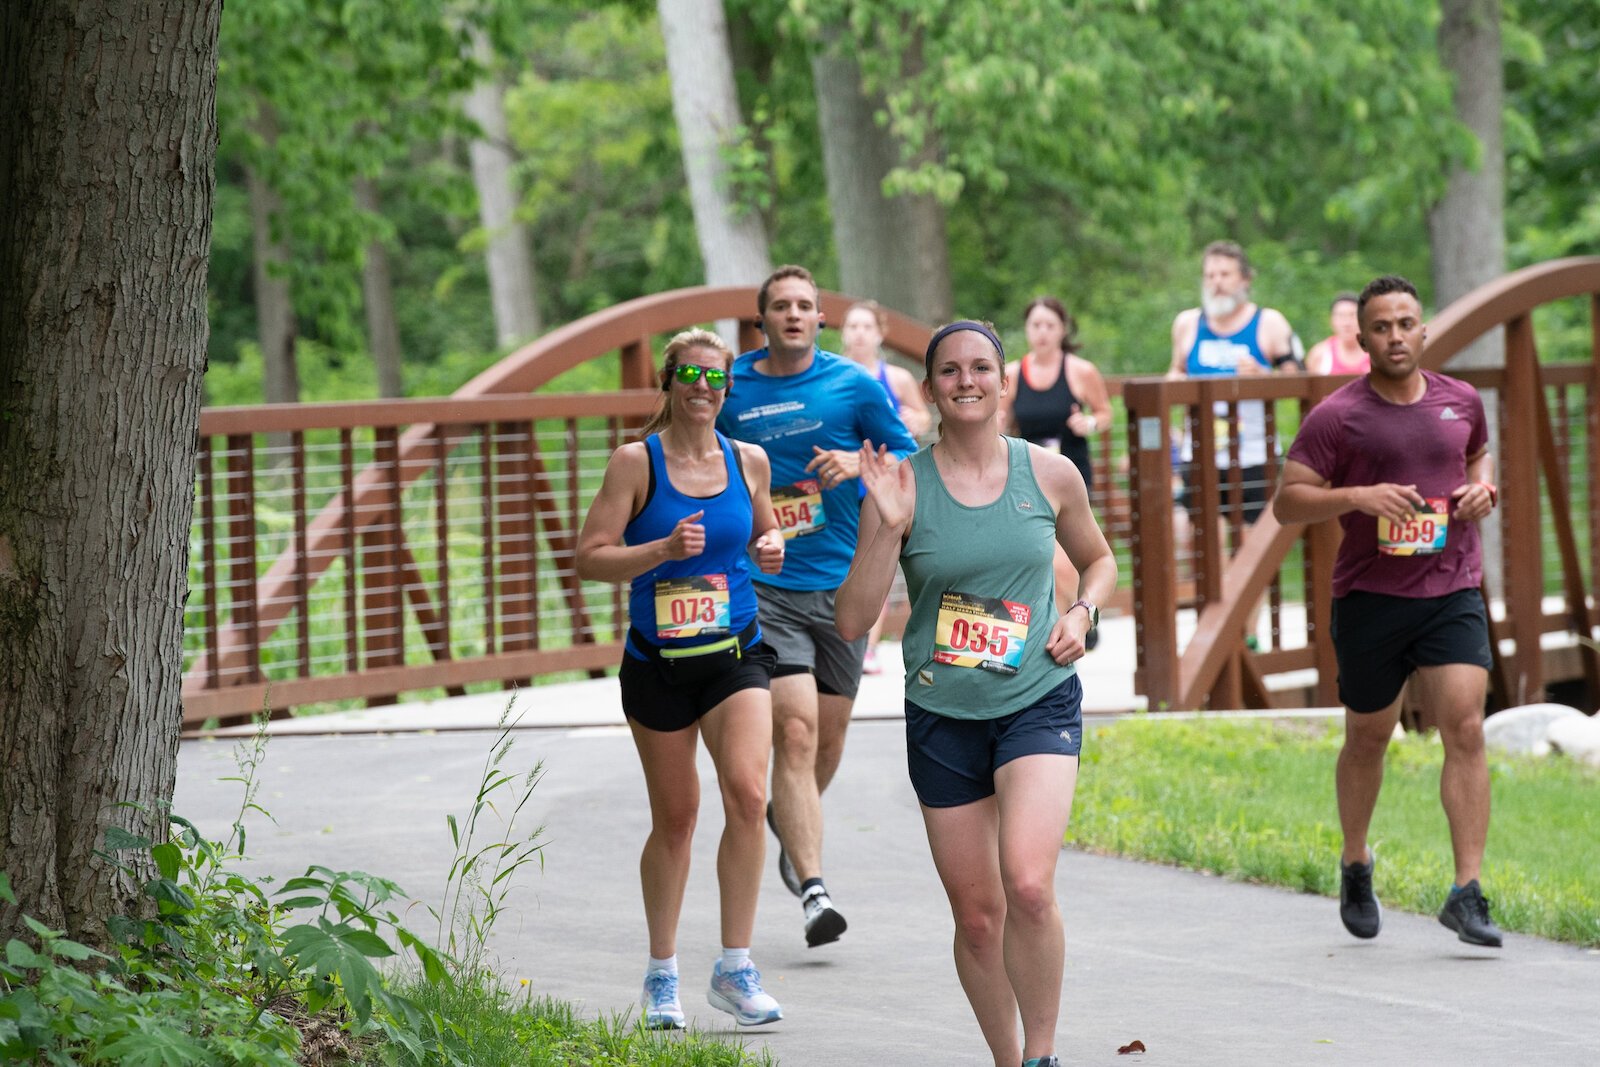 Runners on the Wabash River Trail during the Run the River Half Marathon.